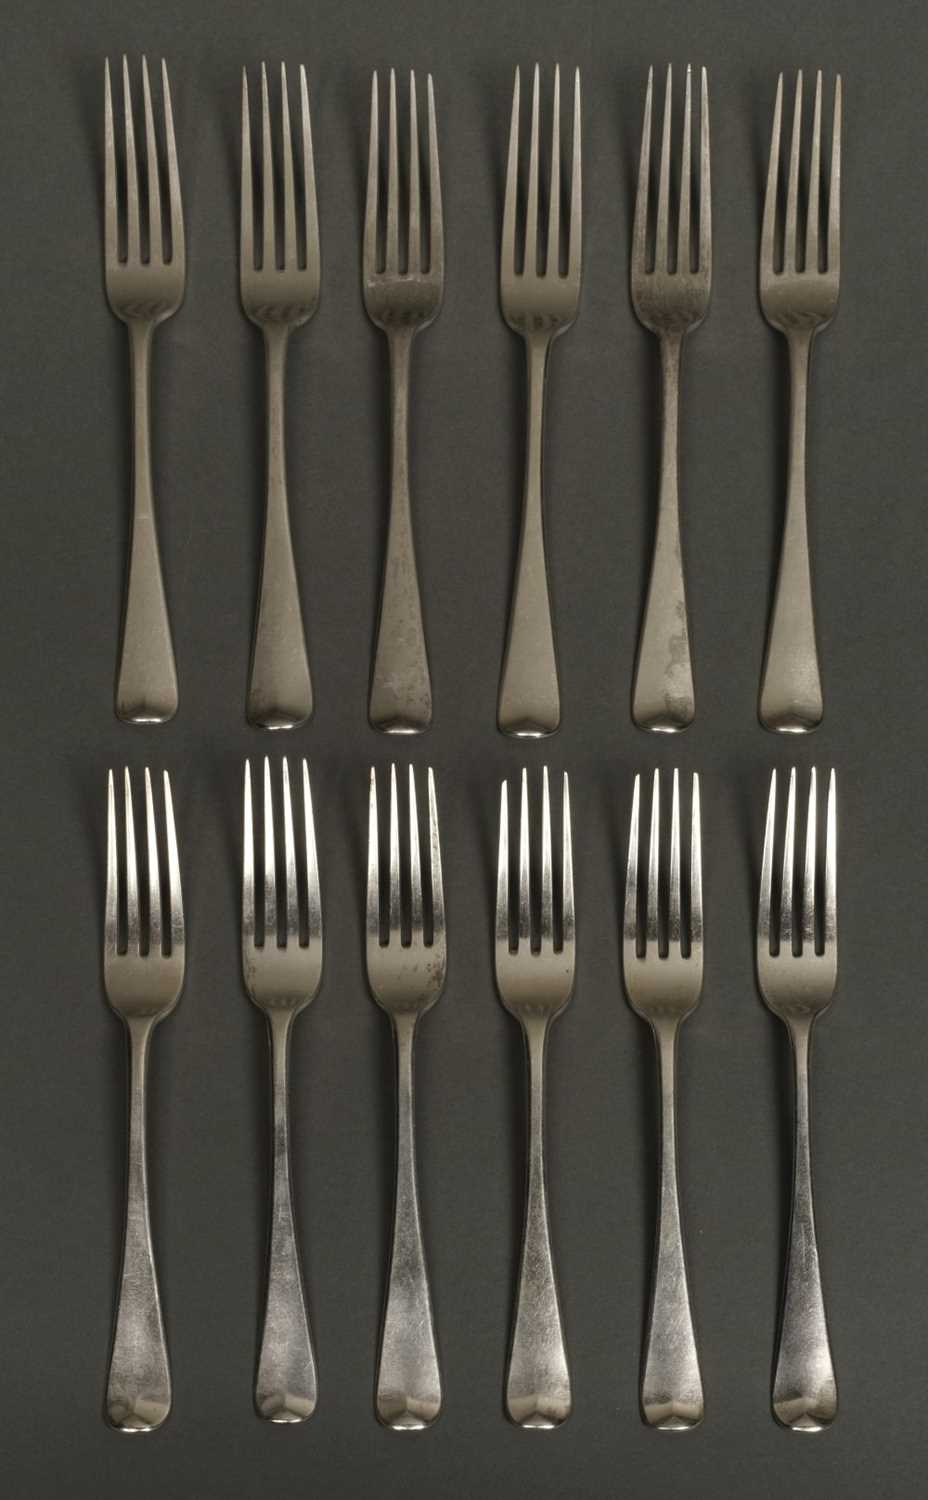 Lot 13 - Forks. 12 George III silver table forks by Thomas Wilkes Barber, London 1809